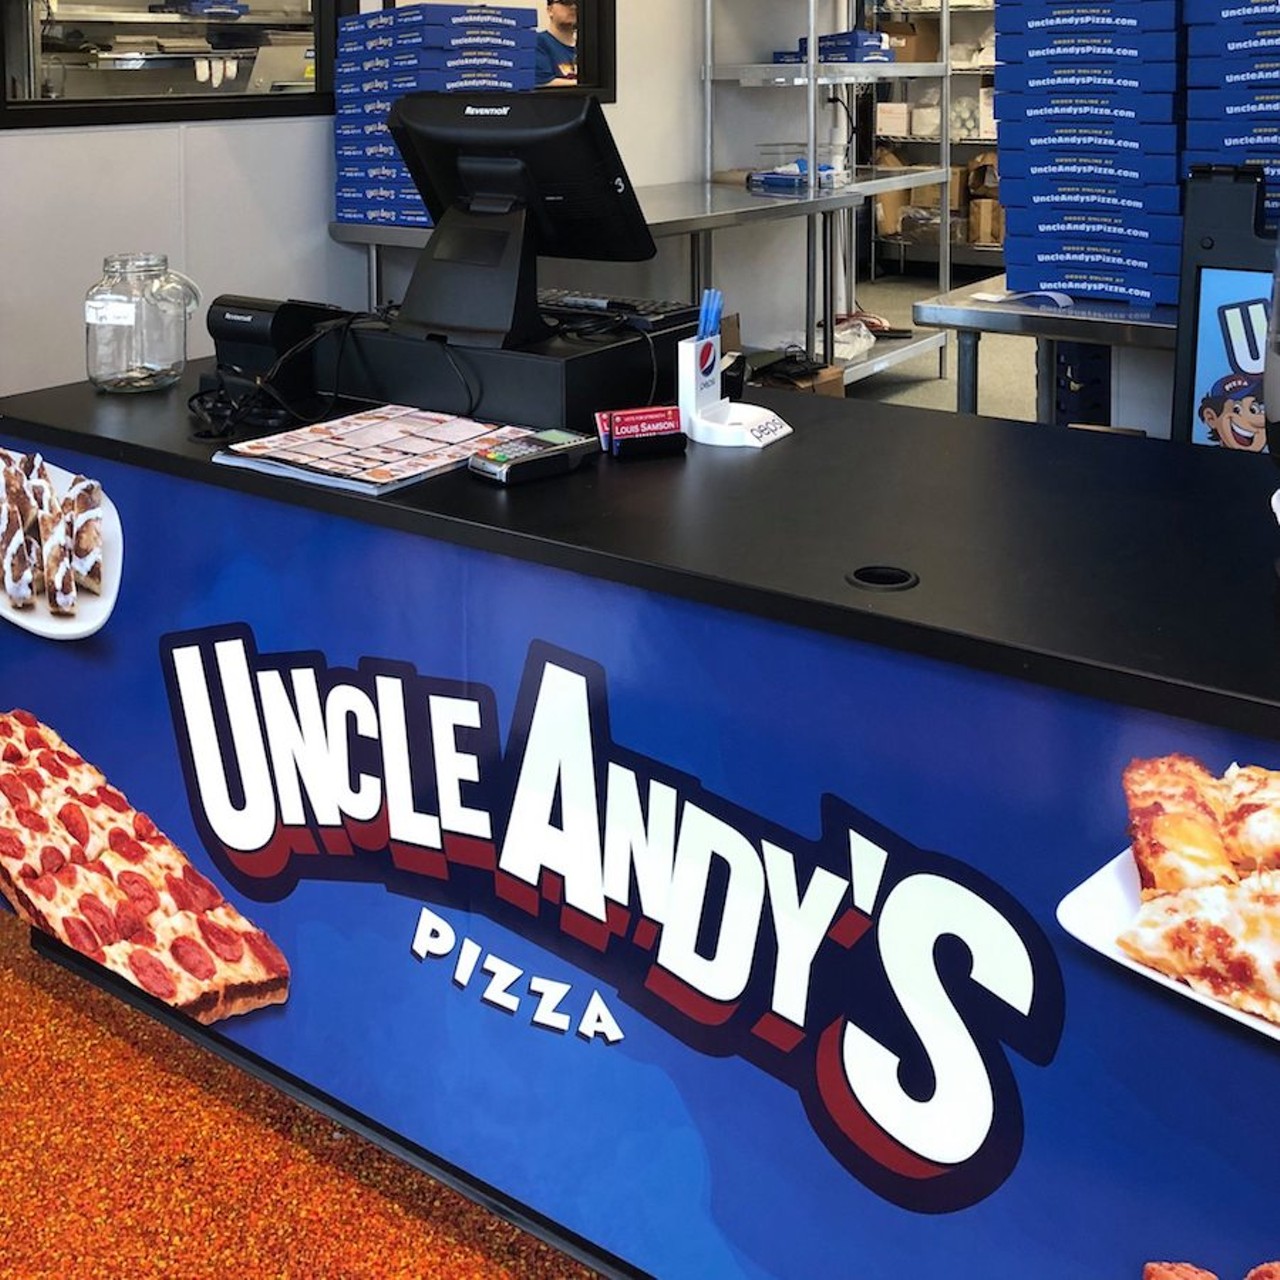 Uncle Andy&#146;s Pizza
Various locations; uncleandyspizza.com
A signature sauce and daily made fresh dough is really all you can ask for when searching for that next slice. Uncle Andy&#146;s is known for delivering crispy deep dishes at a good price.
Photo via  Uncle Andy's Pizza/Facebook